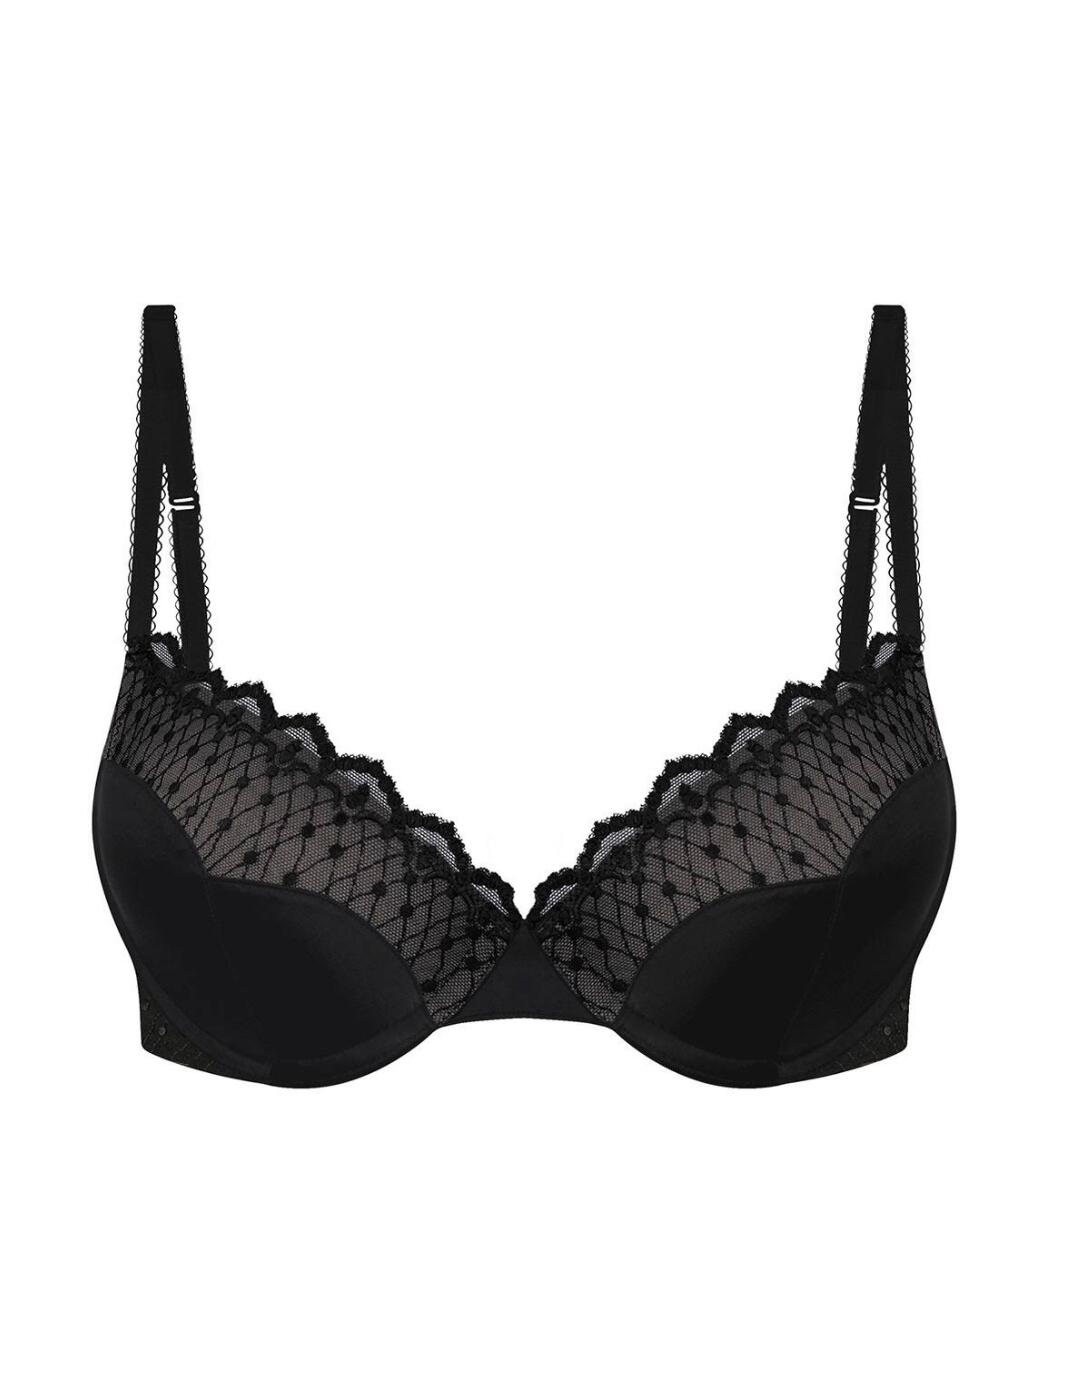 COMFY Wonderlove Black Classic Smooth Padded Underwired Bra(Sold Out)